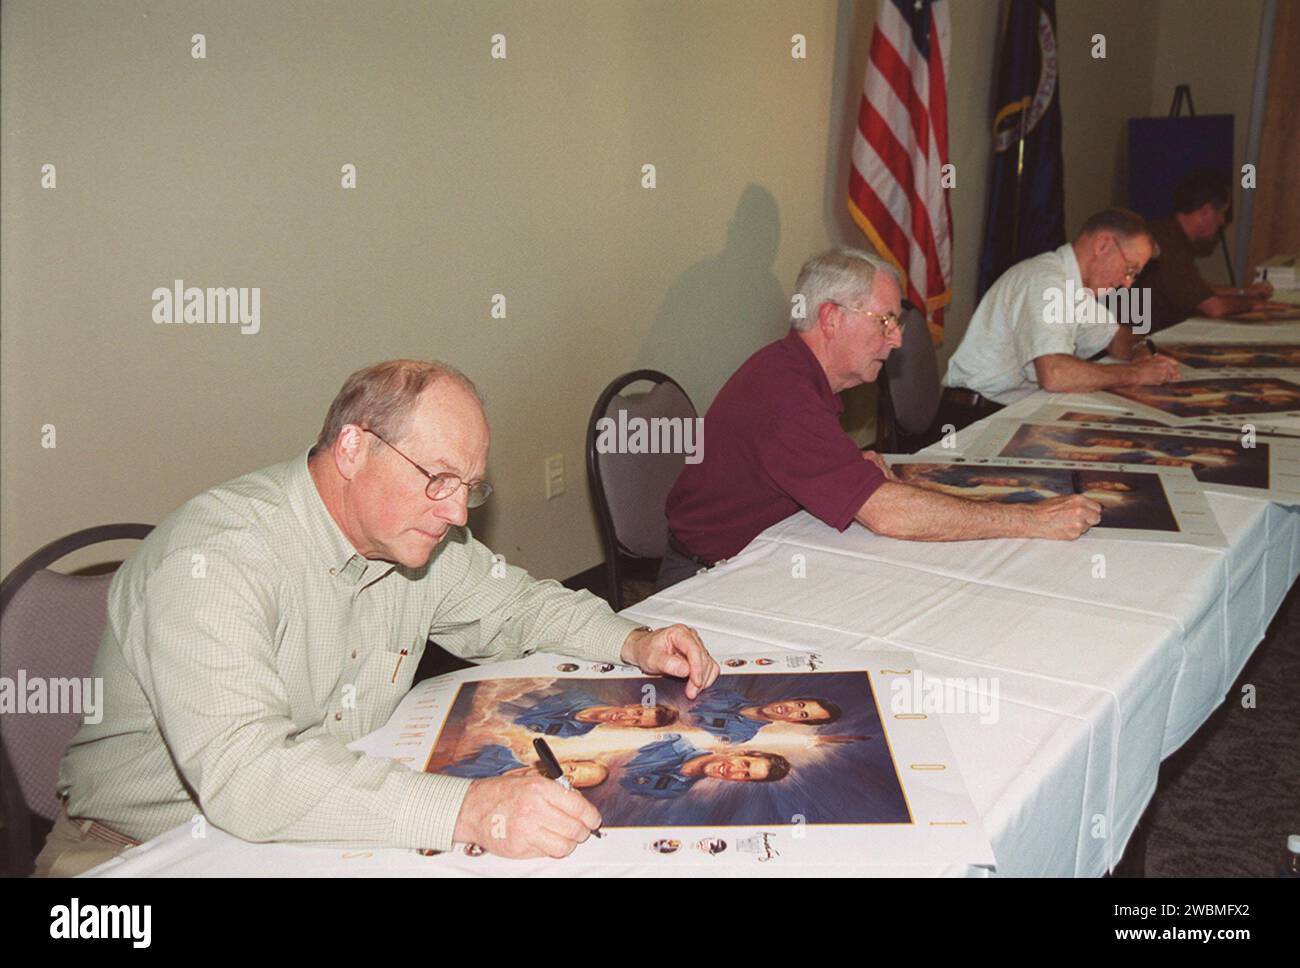 KENNEDY SPACE CENTER, Fla. -- The first four Shuttle astronauts take time to sign posters commemorating their induction into the U.S. Astronaut Hall of Fame Nov. 10. Seated from left are Frederick 'Rick' Hauck, Richard Truly, Joe Engle and Robert Crippen. The event took place at the KSC Visitor Complex Stock Photo